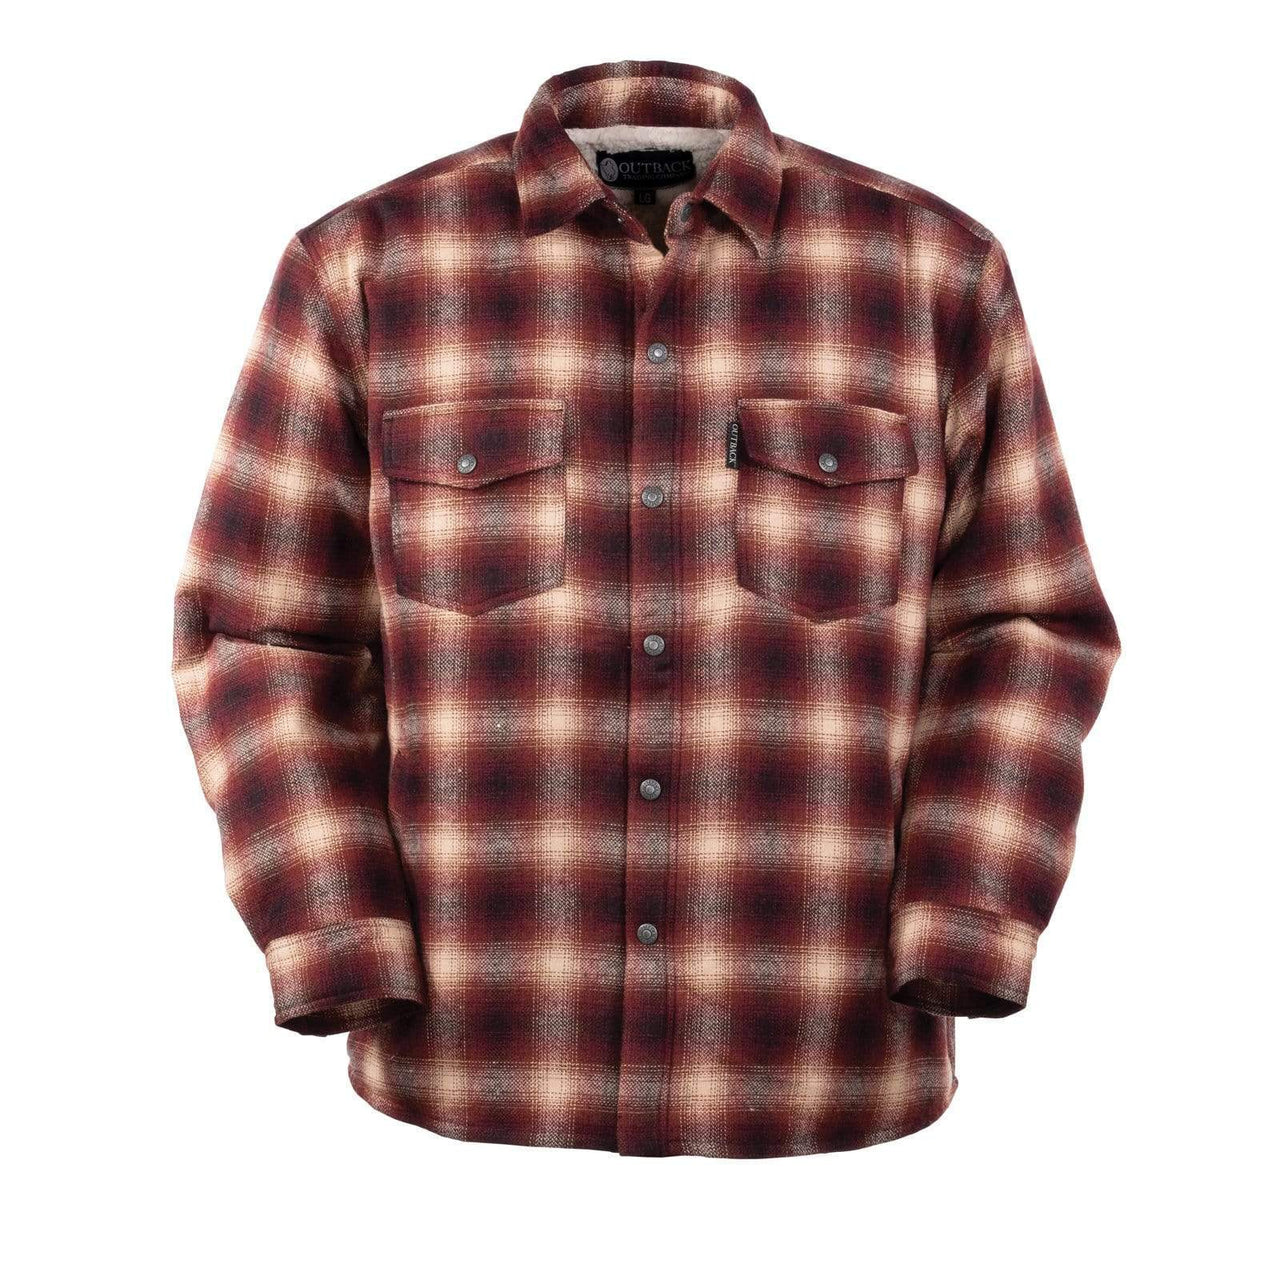 Outback Trading Company Arden Jacket